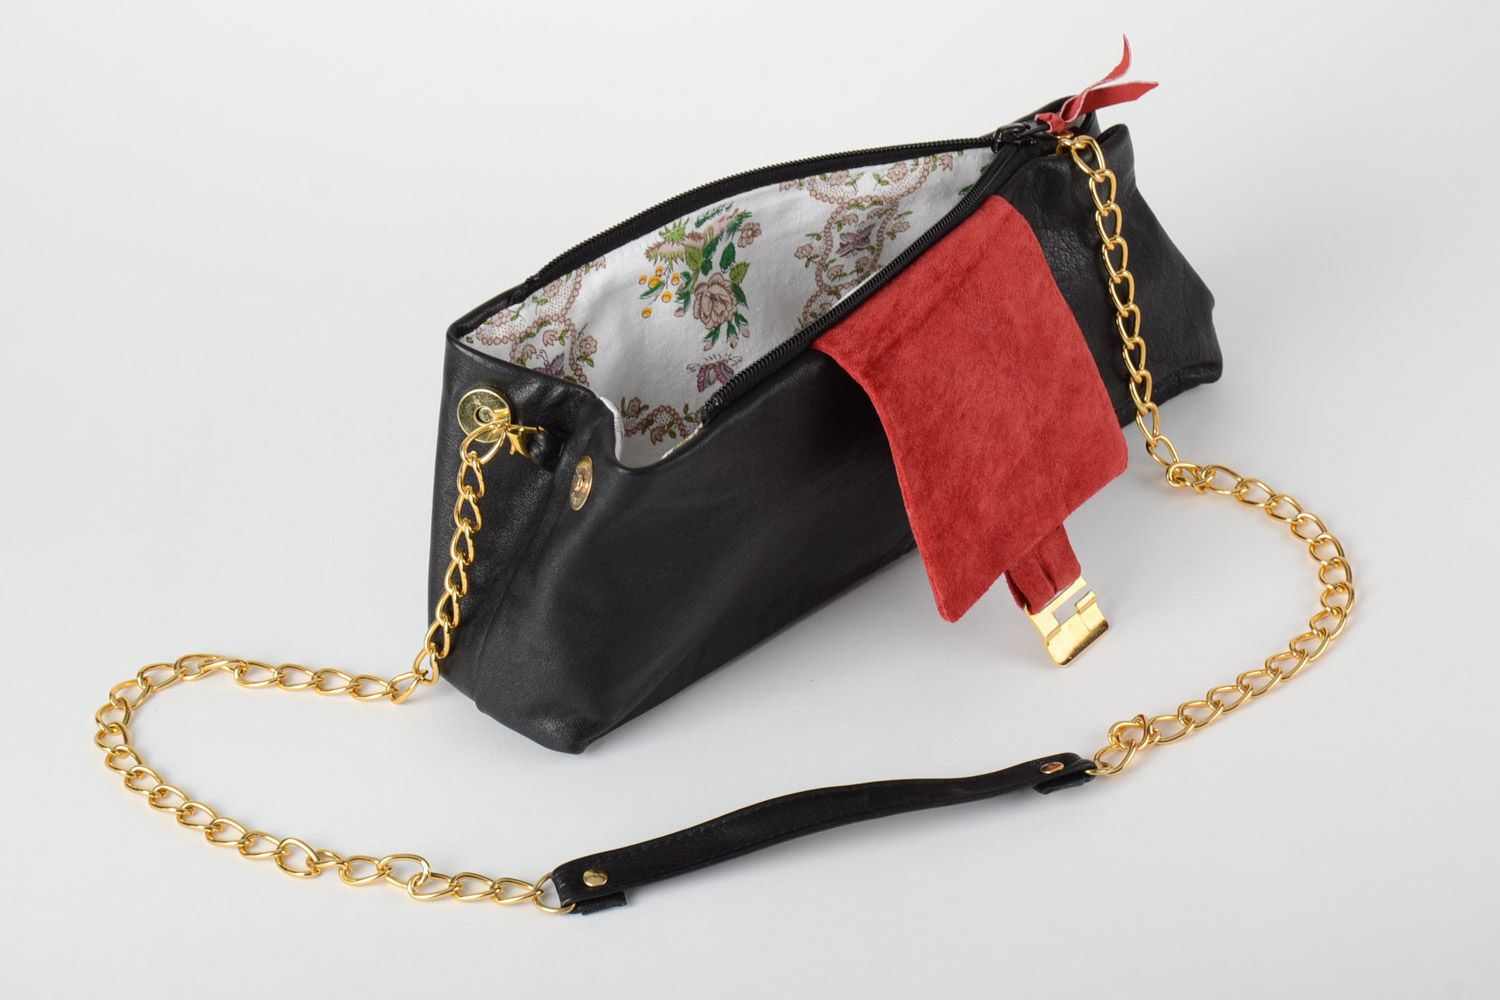 Handmade women's clutch bag sewn of black genuine leather with red inserts on chain photo 3